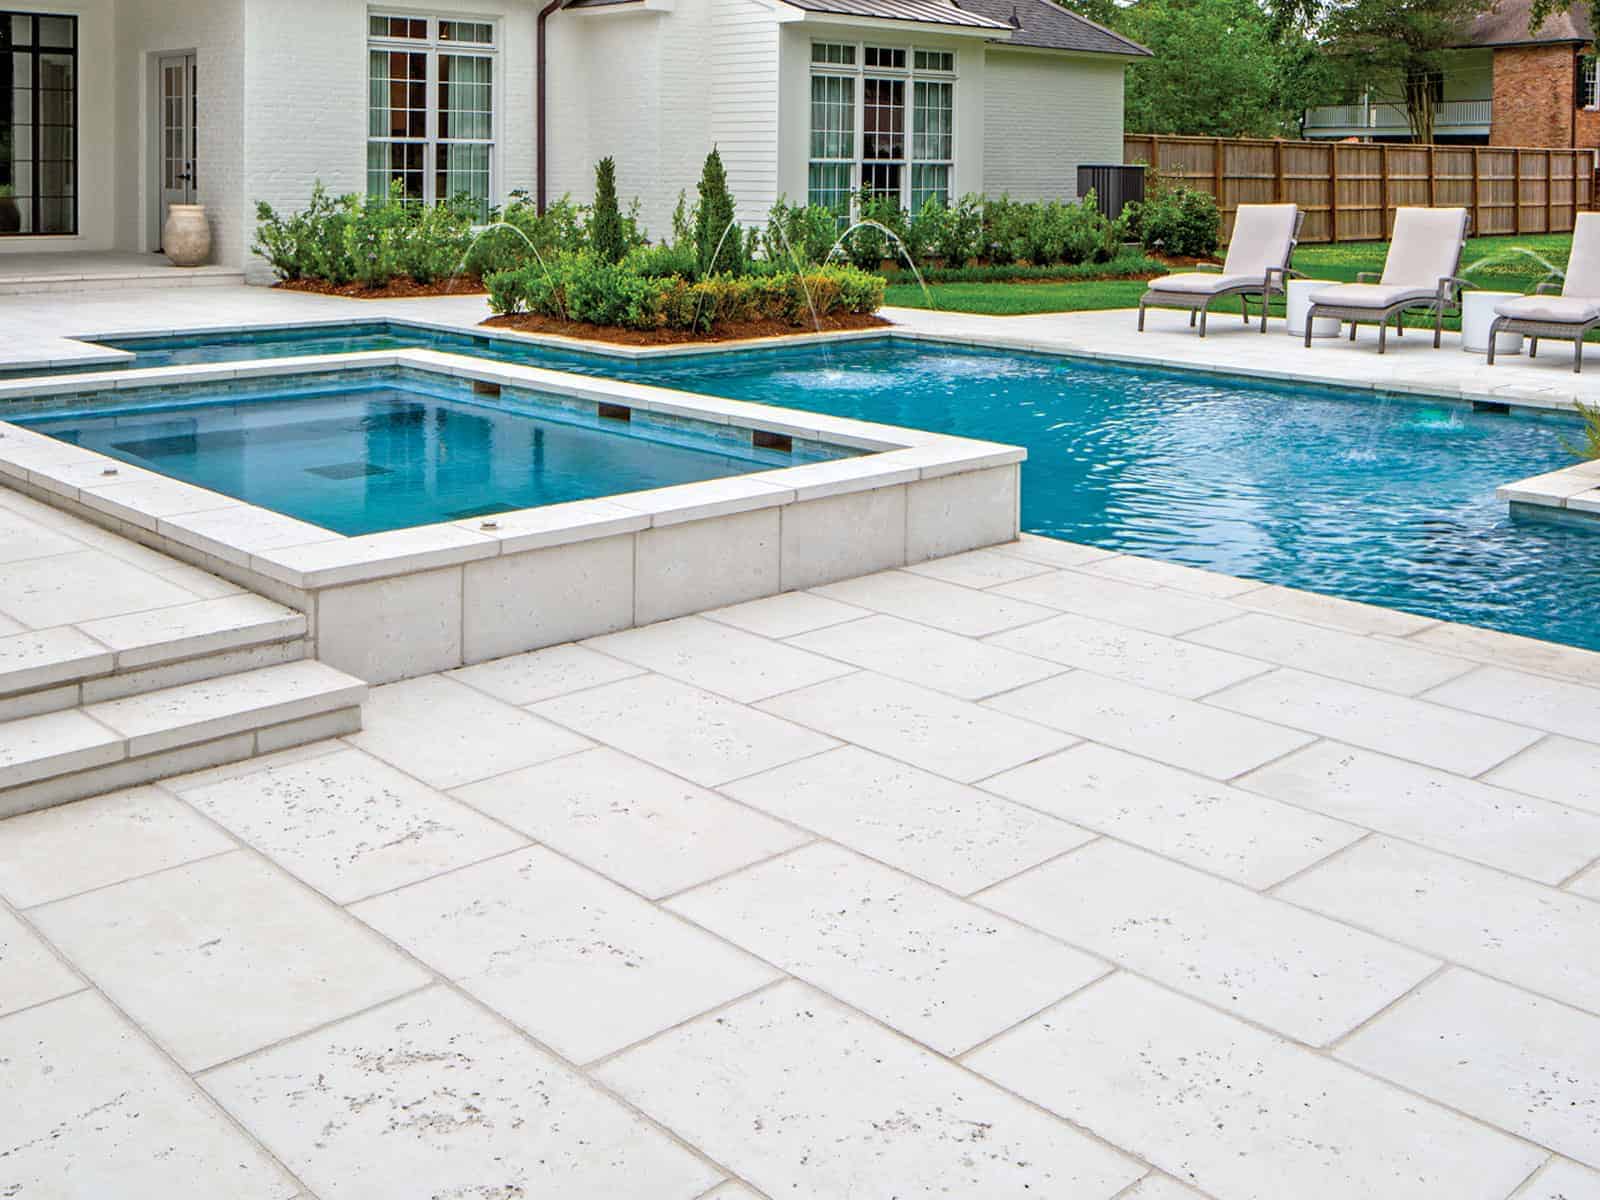 Pavers for Pool Decking and Hot Tub Facing